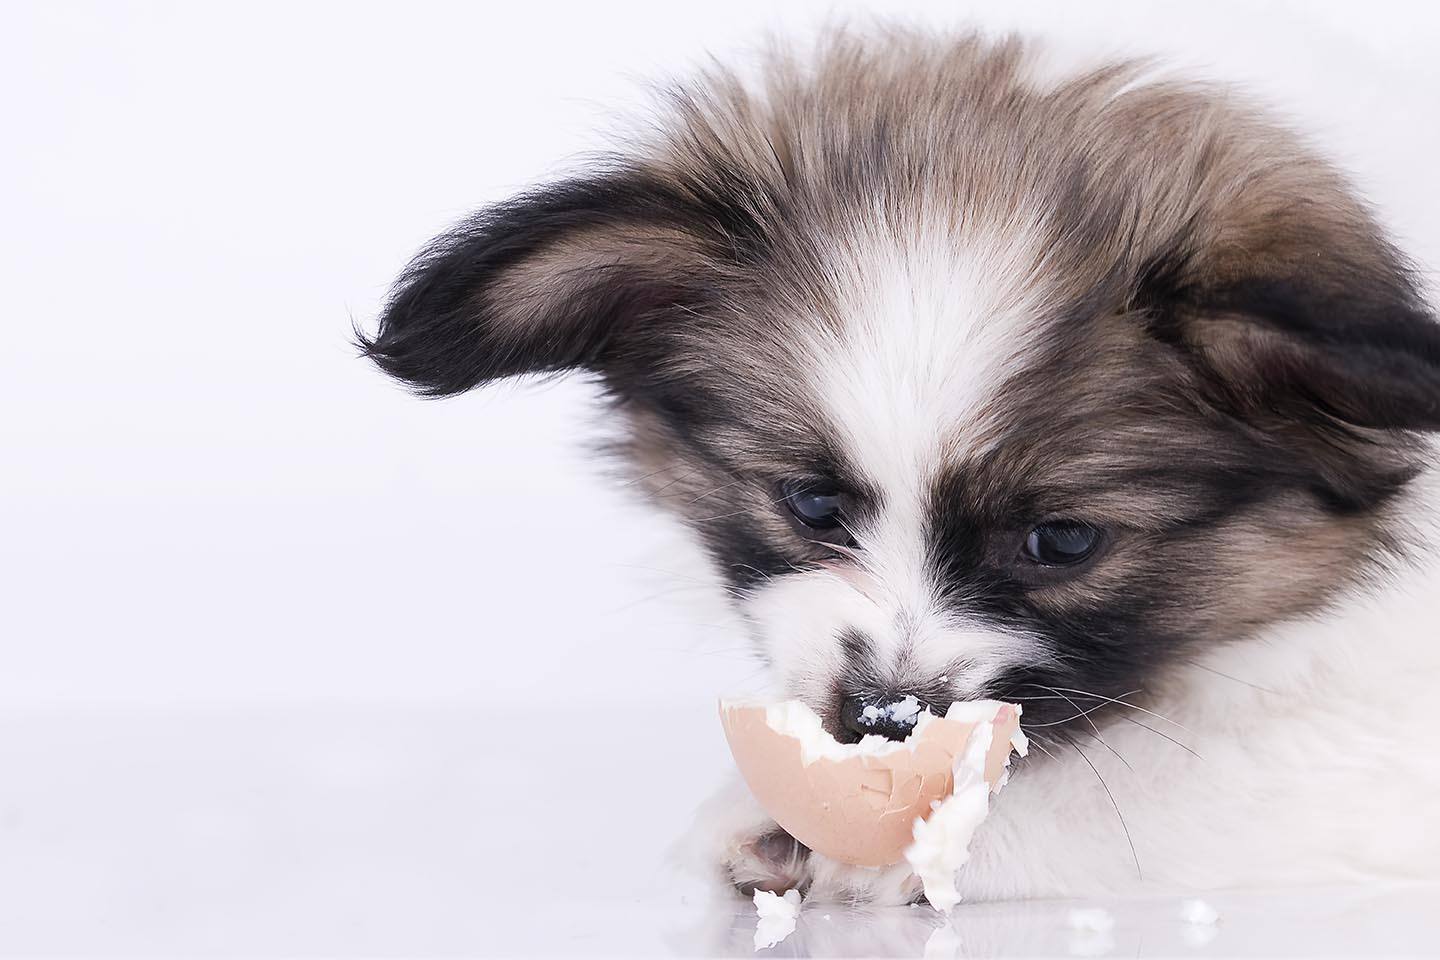 puppy eating egg